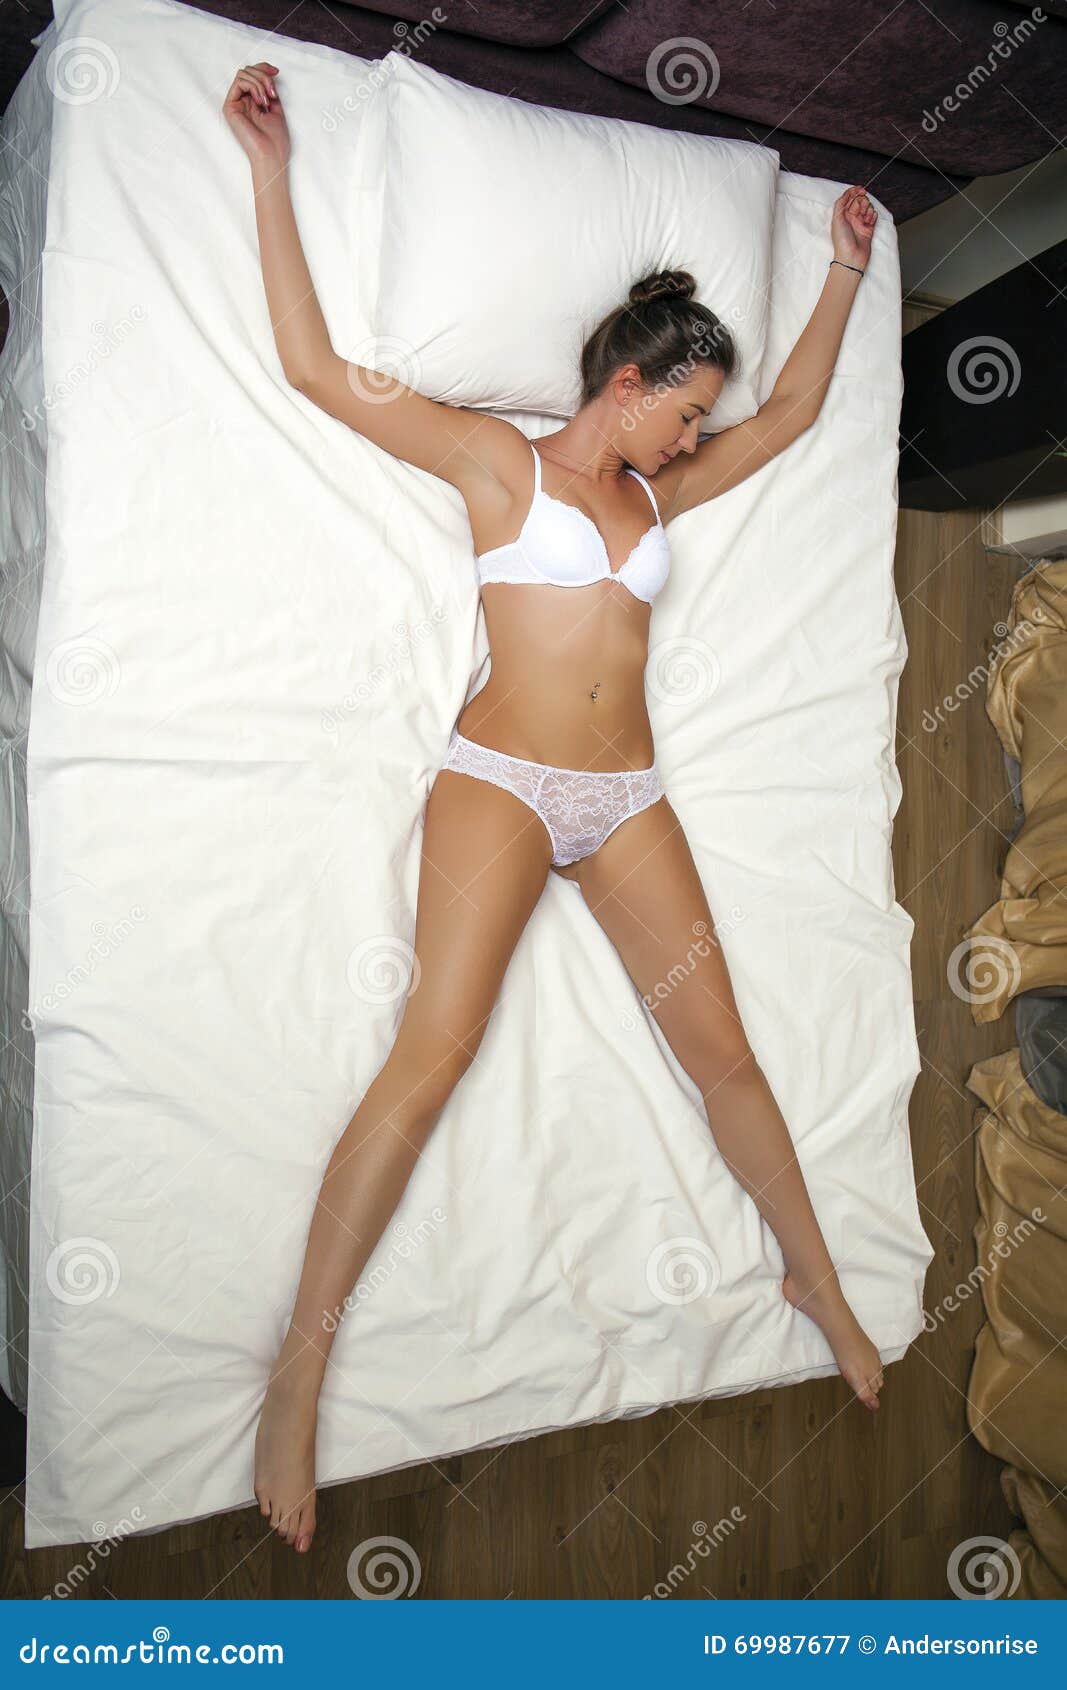 Sleeping Positions. Young Woman In White Underwear Sleeping On A Double Bed  Stock Photo, Picture and Royalty Free Image. Image 55322513.